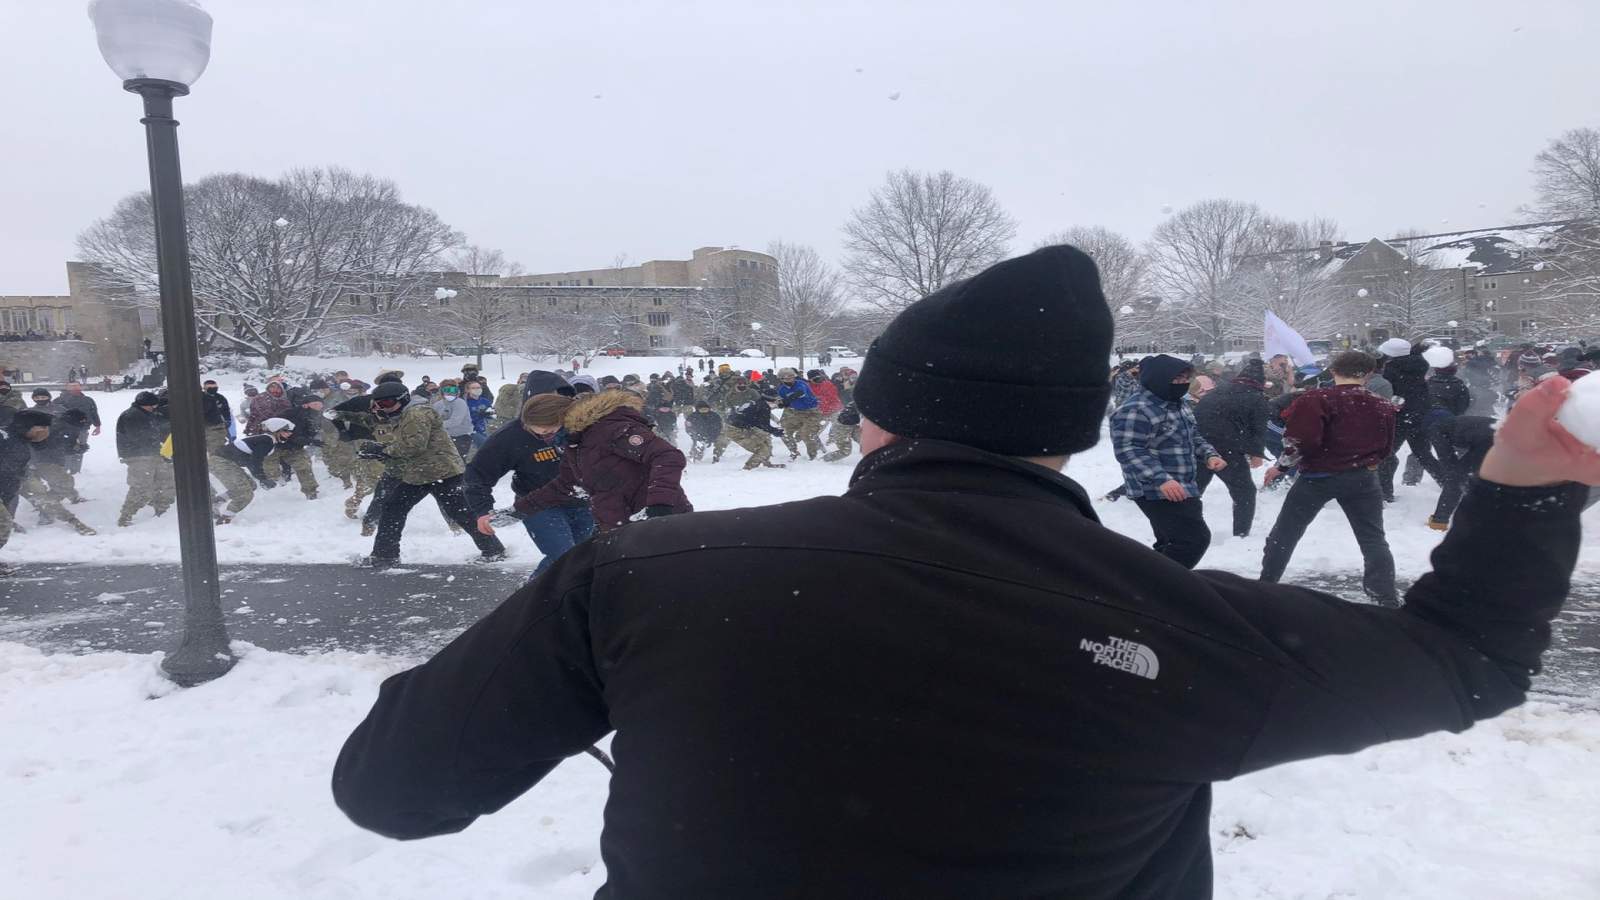 Virginia Tech students hold traditional snowball fight after town receives 6 inches of snow - WSLS 10